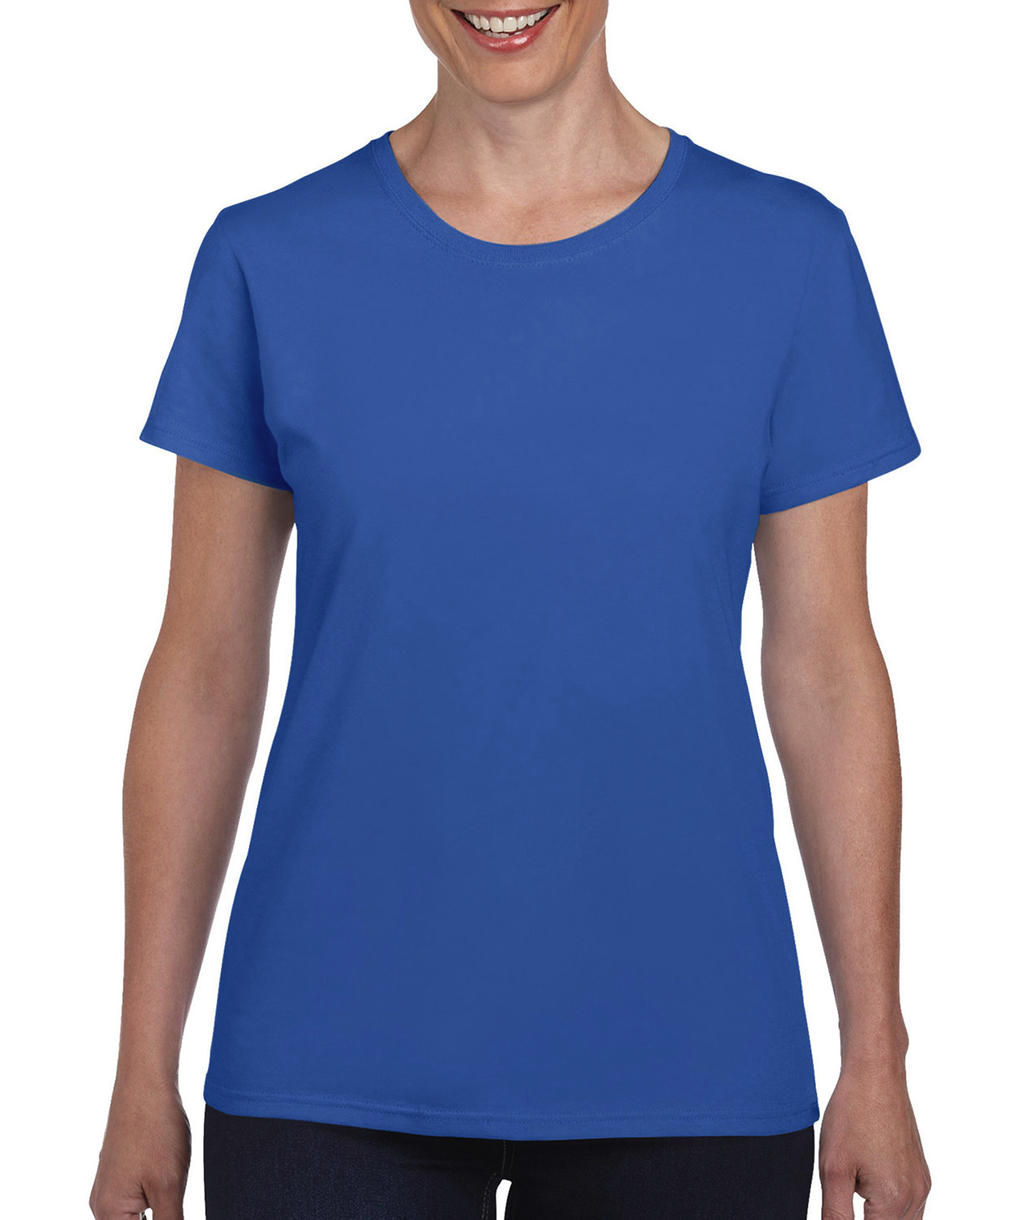  Ladies Heavy Cotton T-Shirt in Farbe Royal